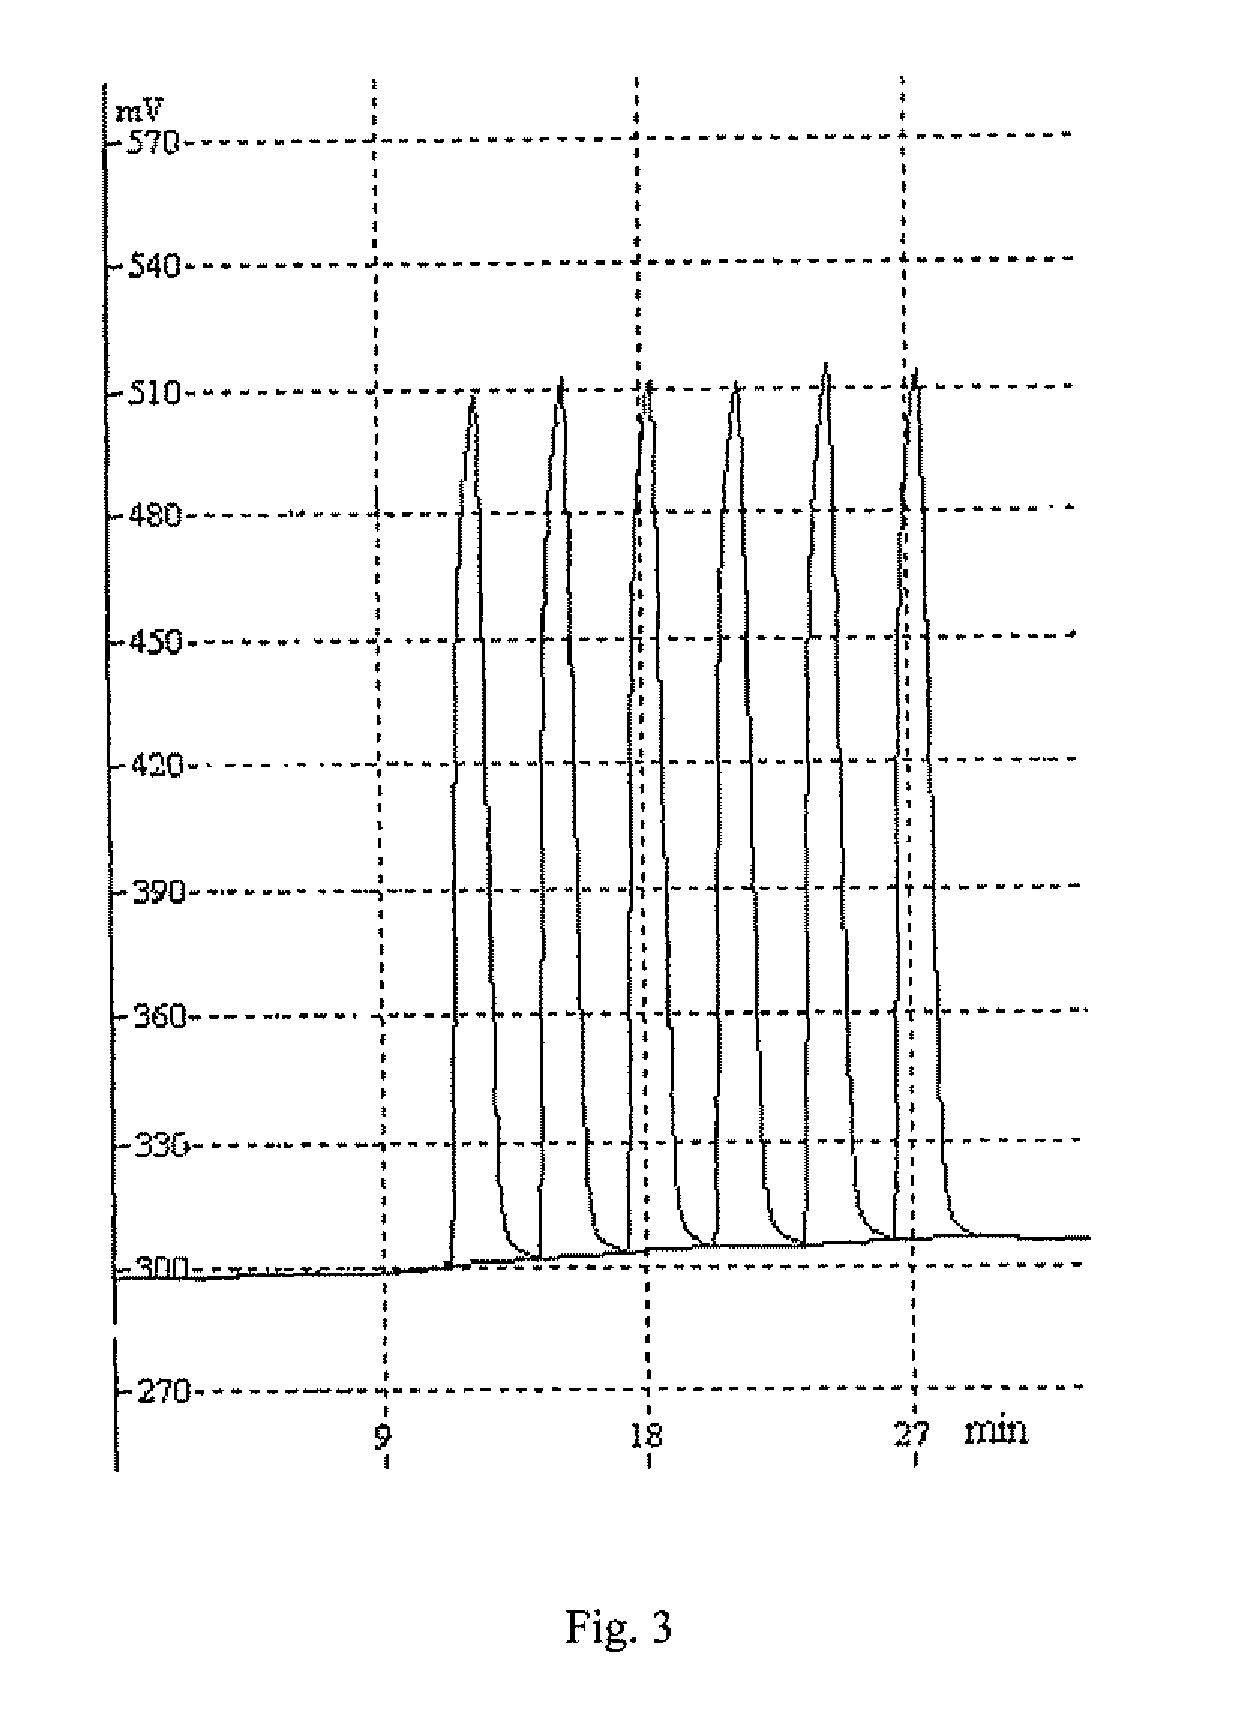 Method for automatic assay of anionic detergents in seawater